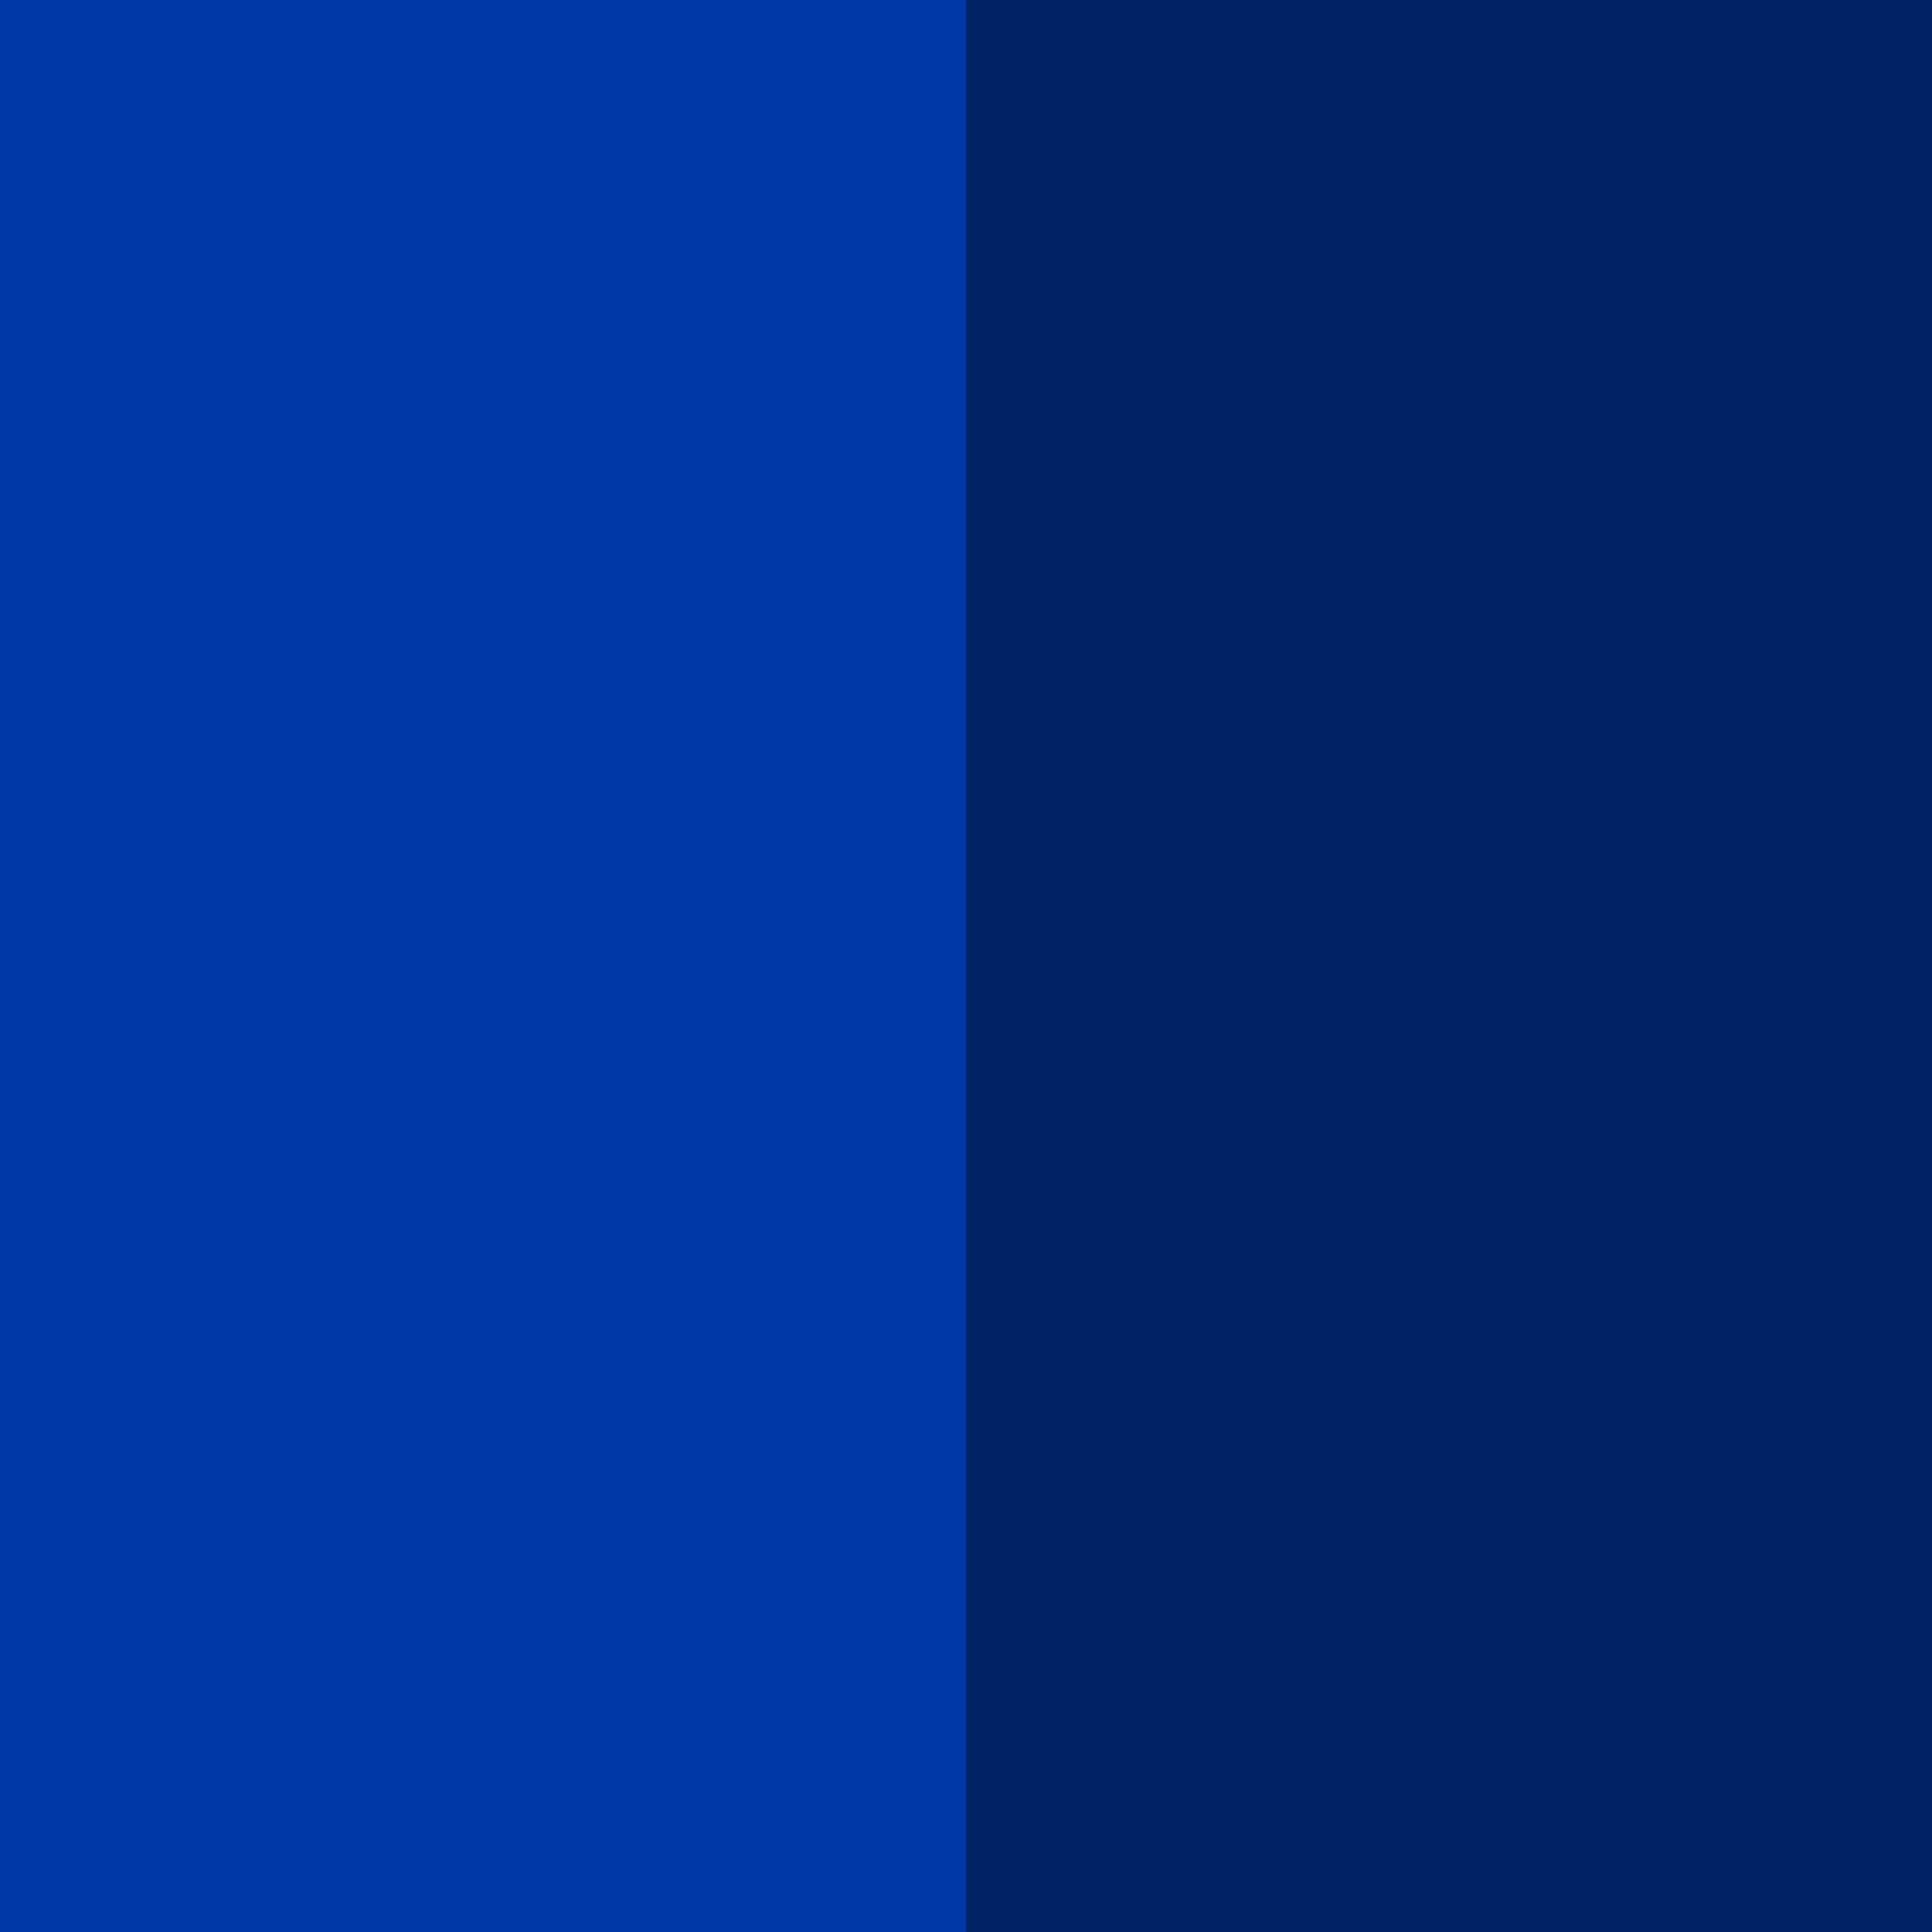 Royal Blue Background Images HD Pictures and Wallpaper For Free Download   Pngtree